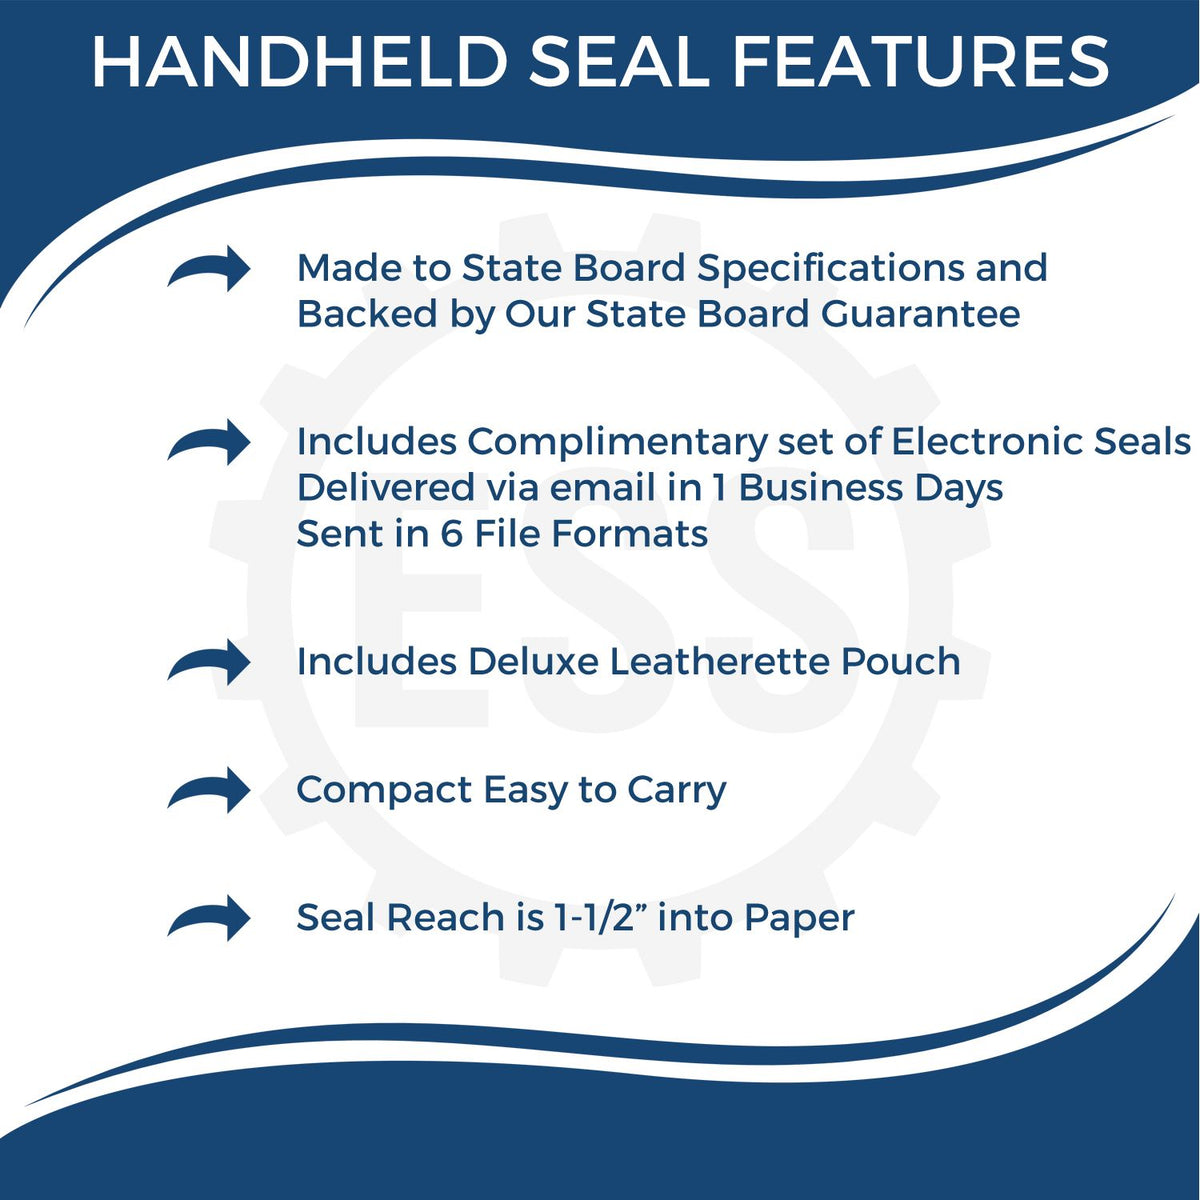 A picture of an infographic highlighting the selling points for the Handheld Alabama Land Surveyor Seal